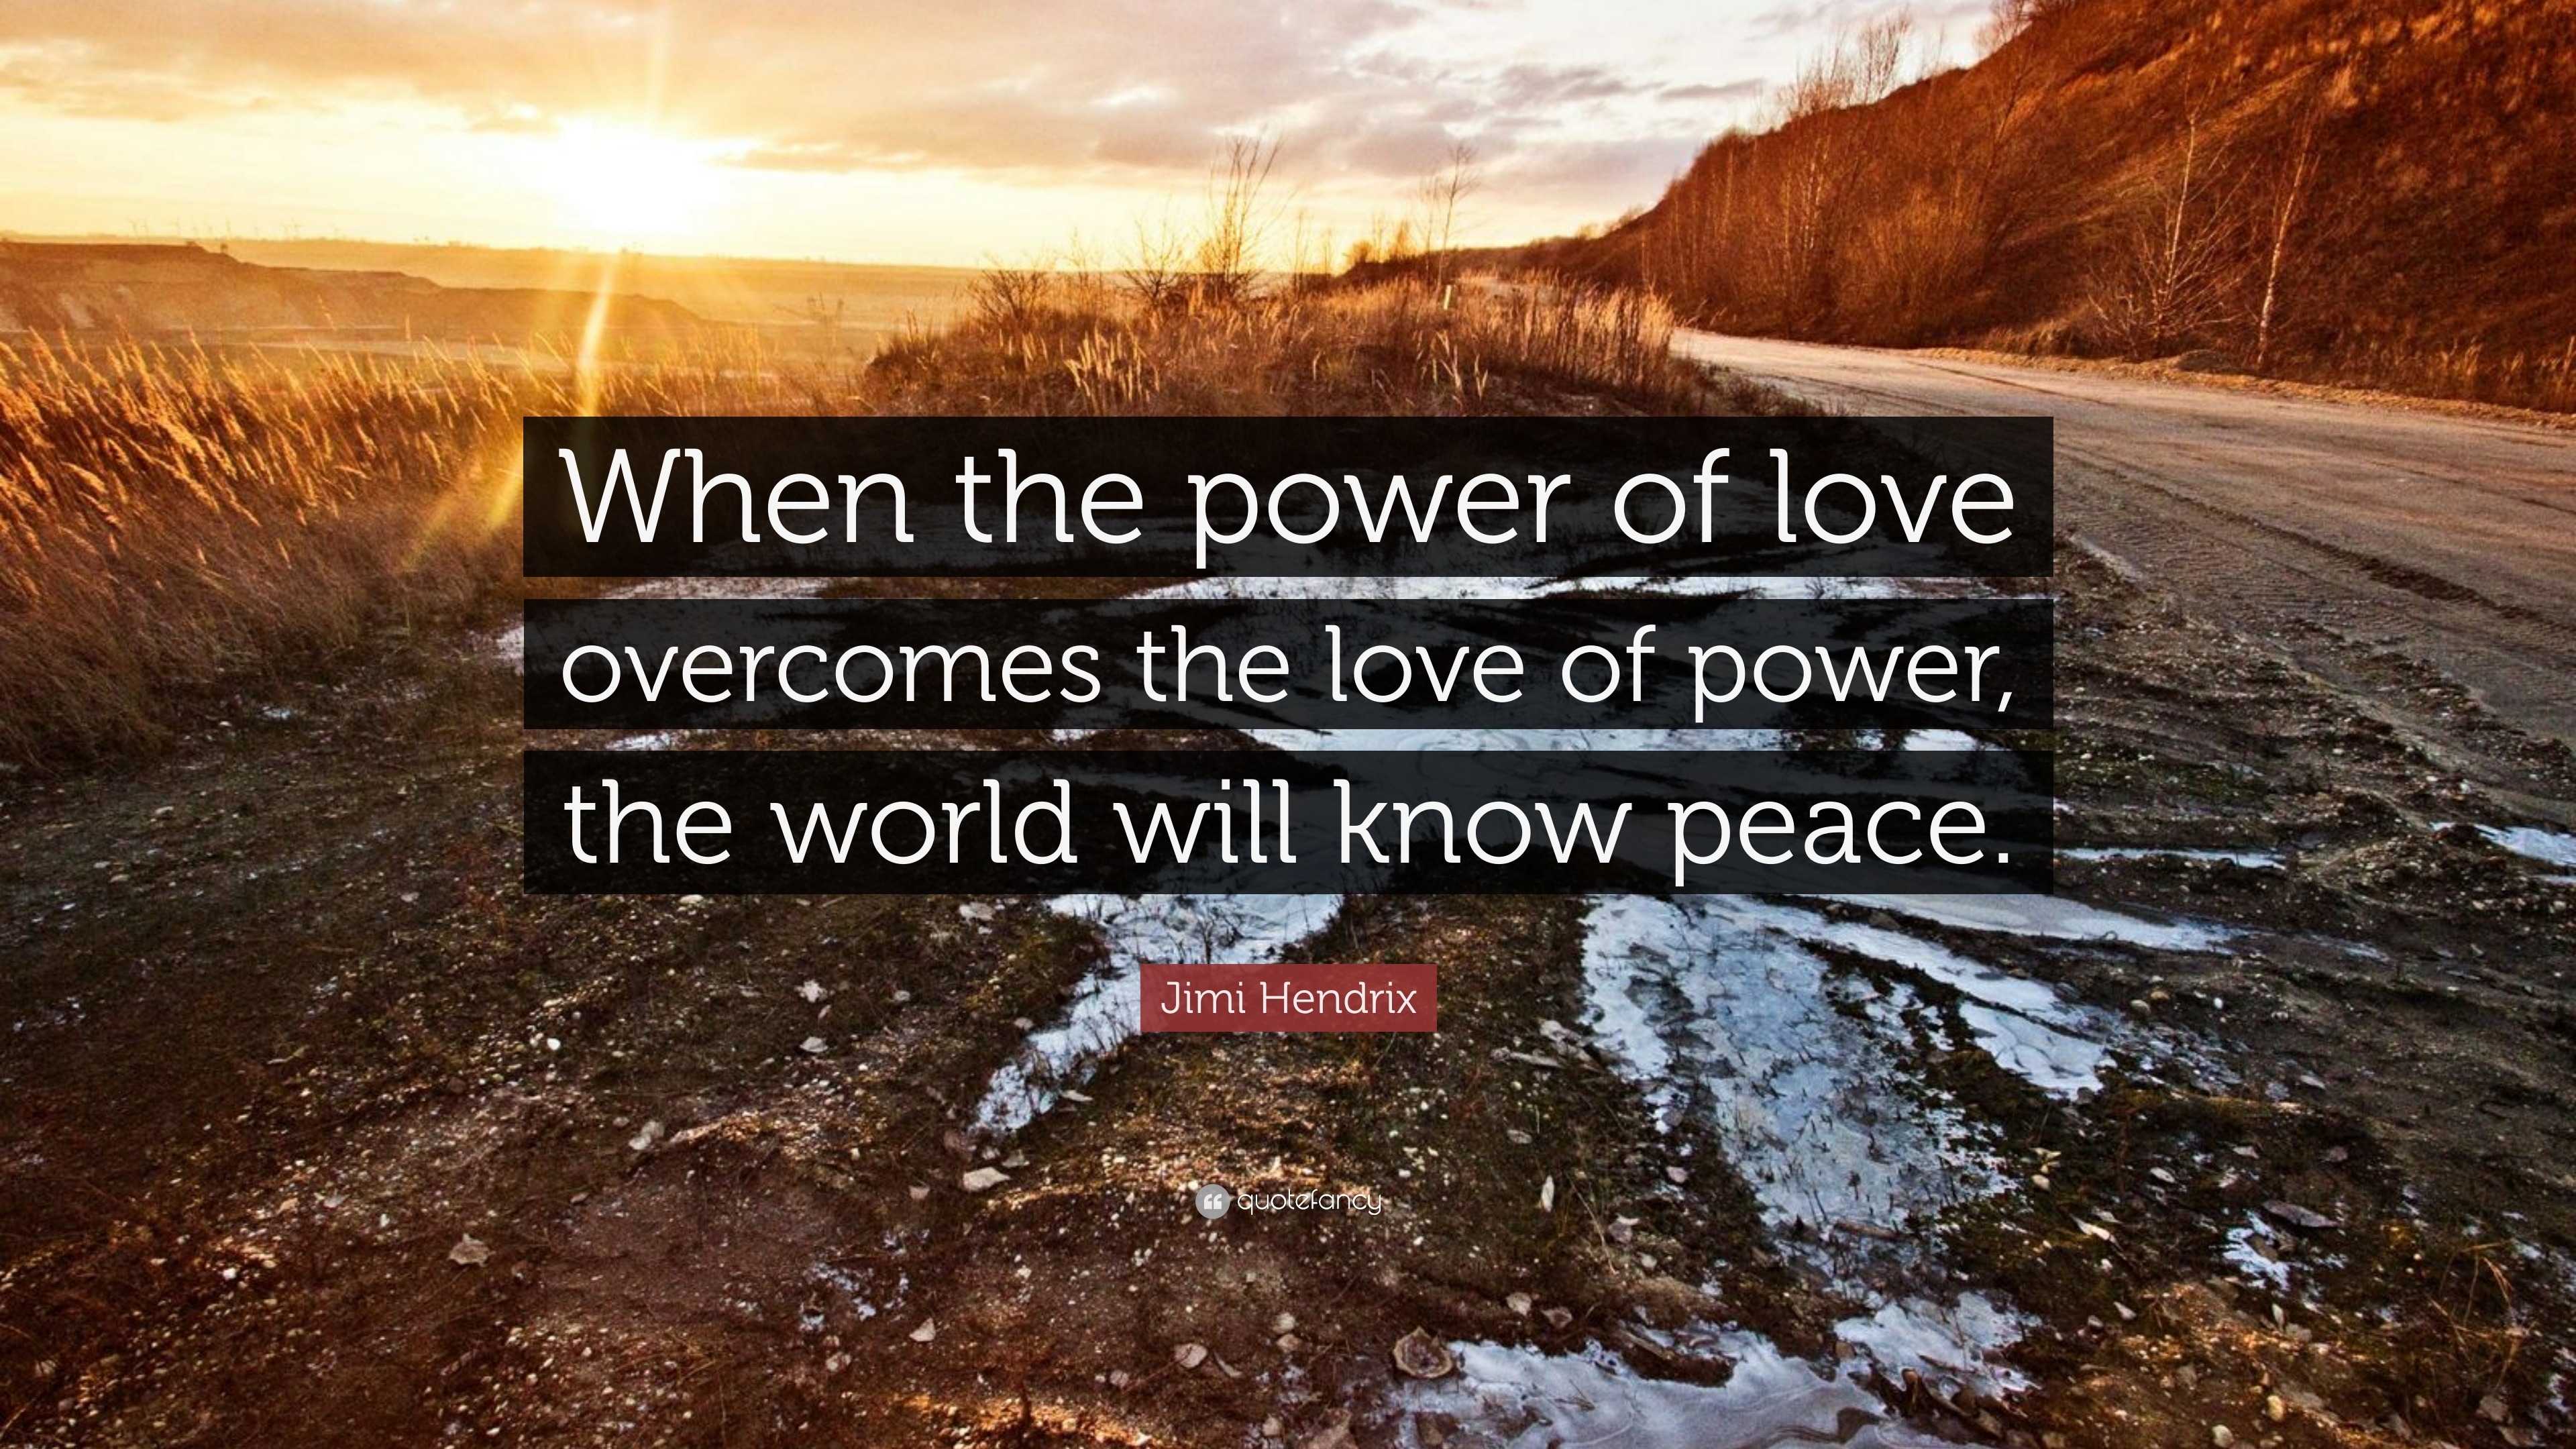 1701950 Jimi Hendrix Quote When the power of love overcomes the love of